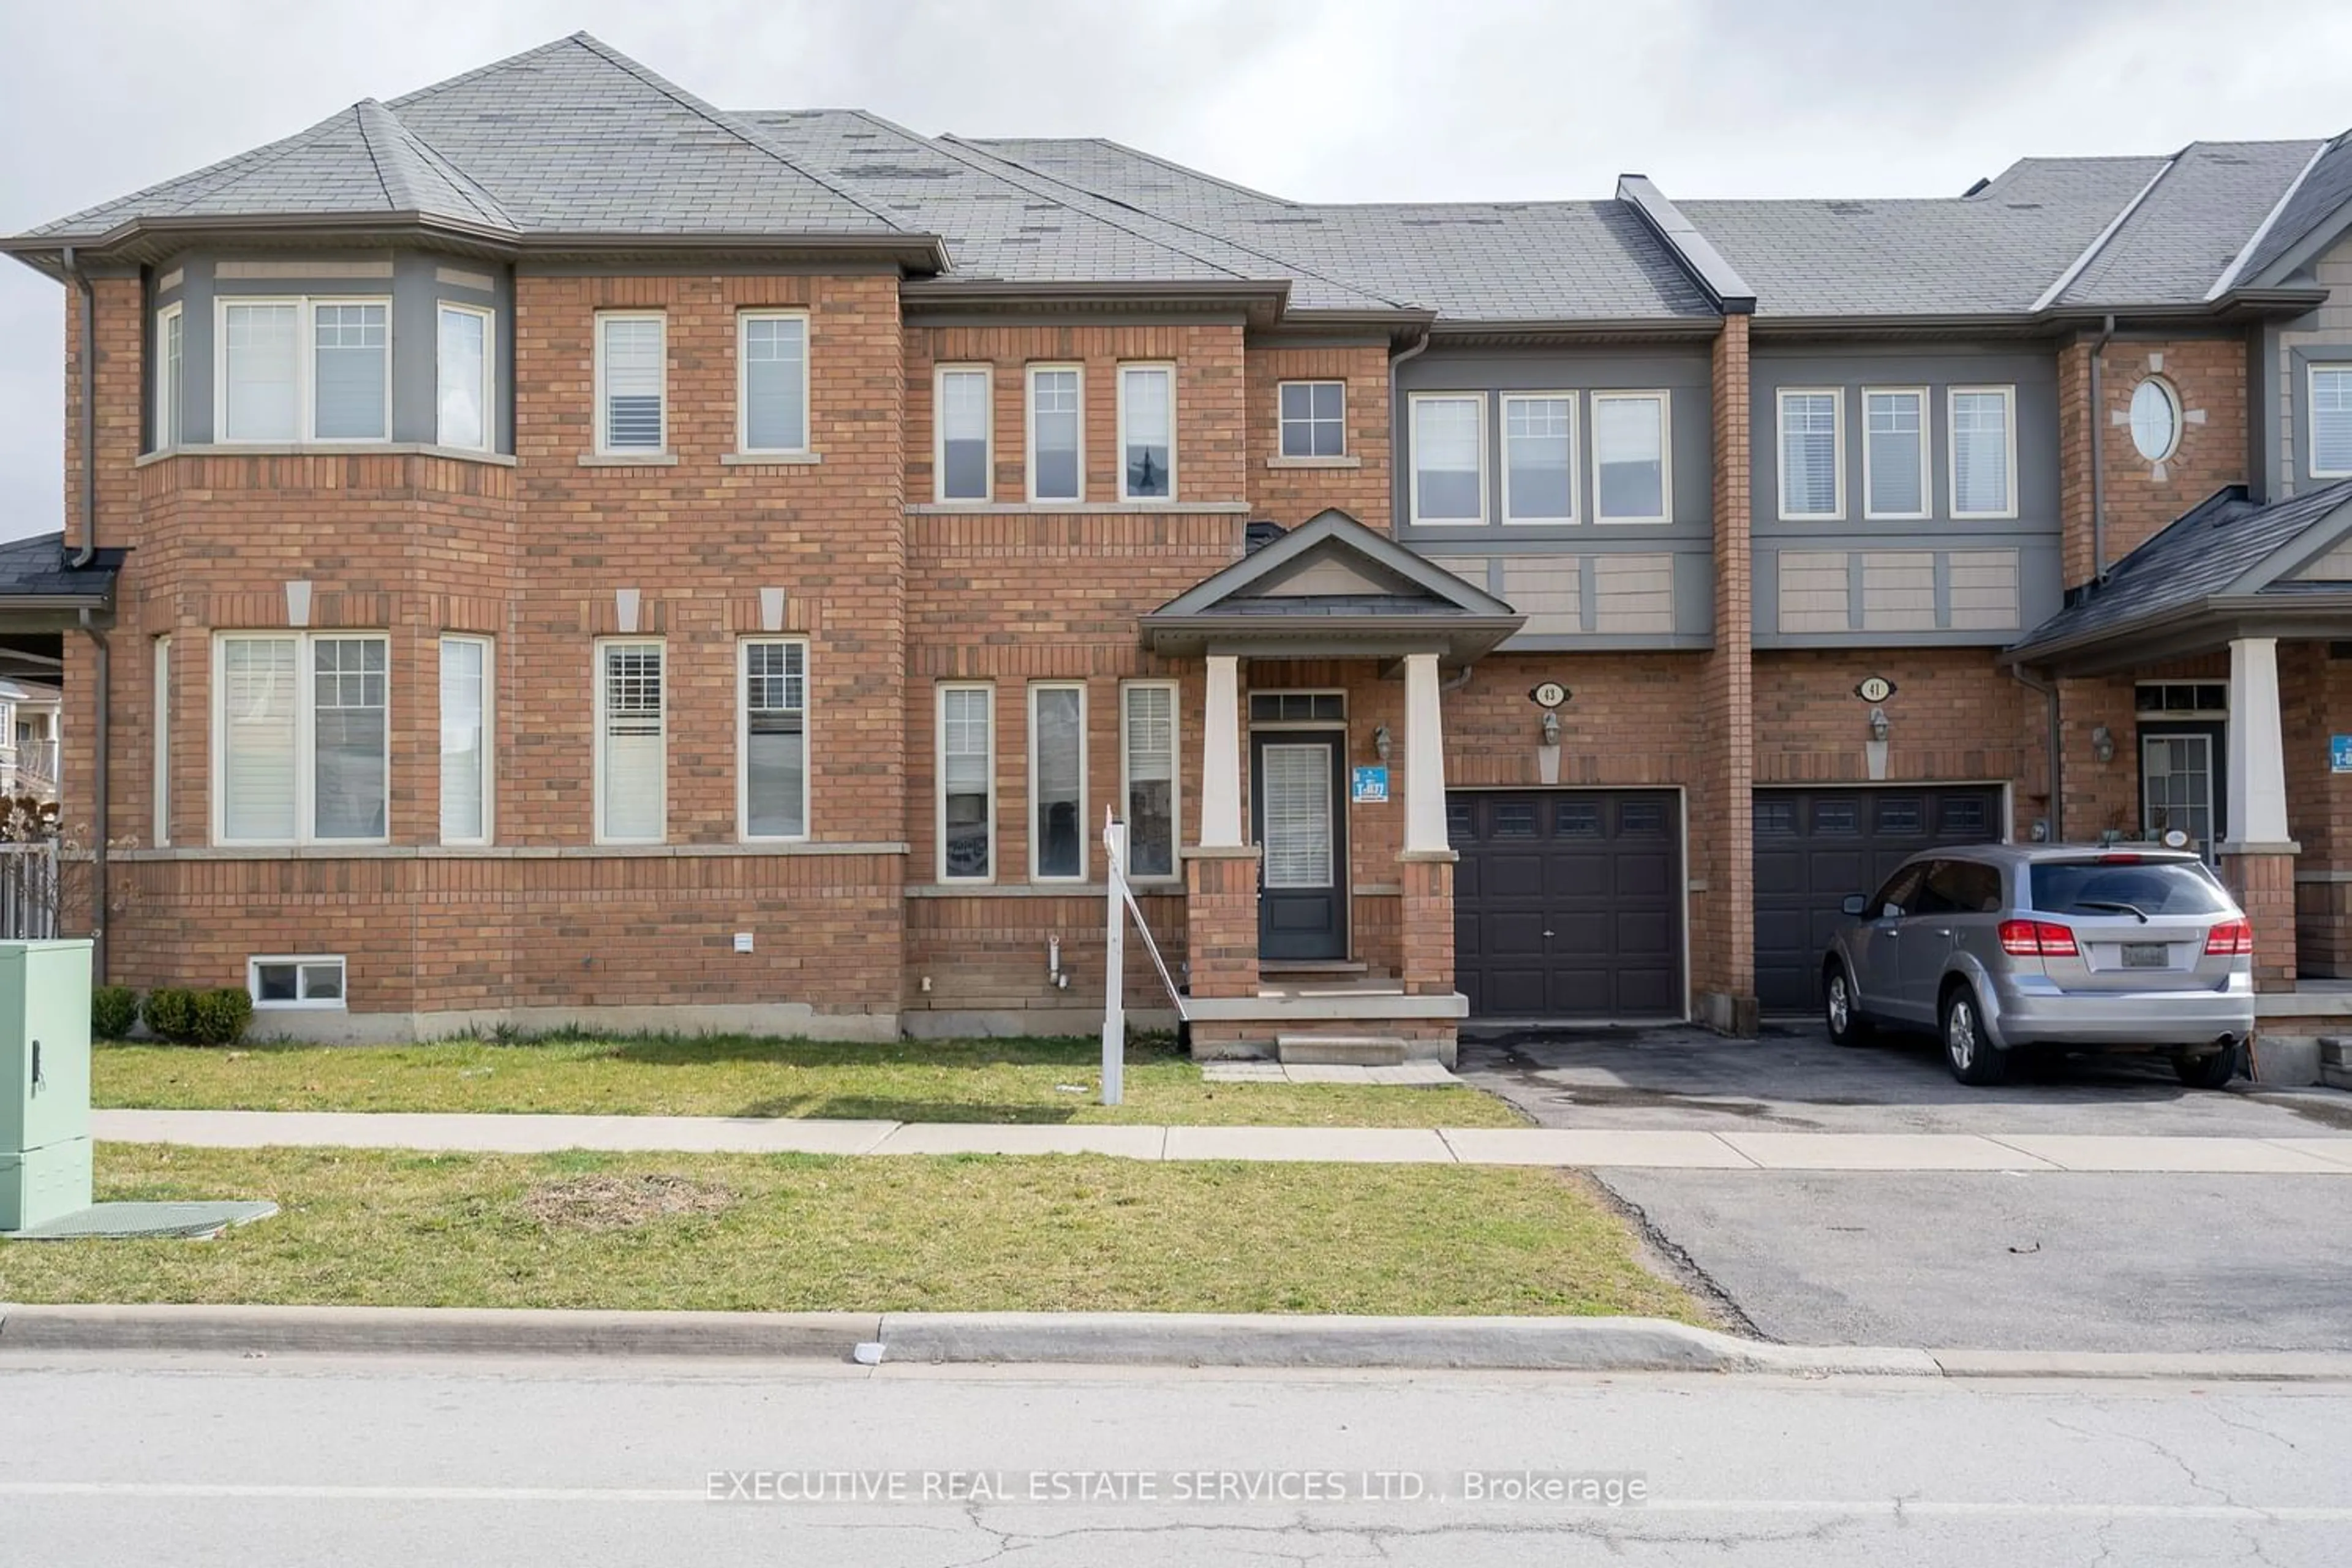 Home with brick exterior material for 43 Sky Harbour Dr, Brampton Ontario L6Y 0V3